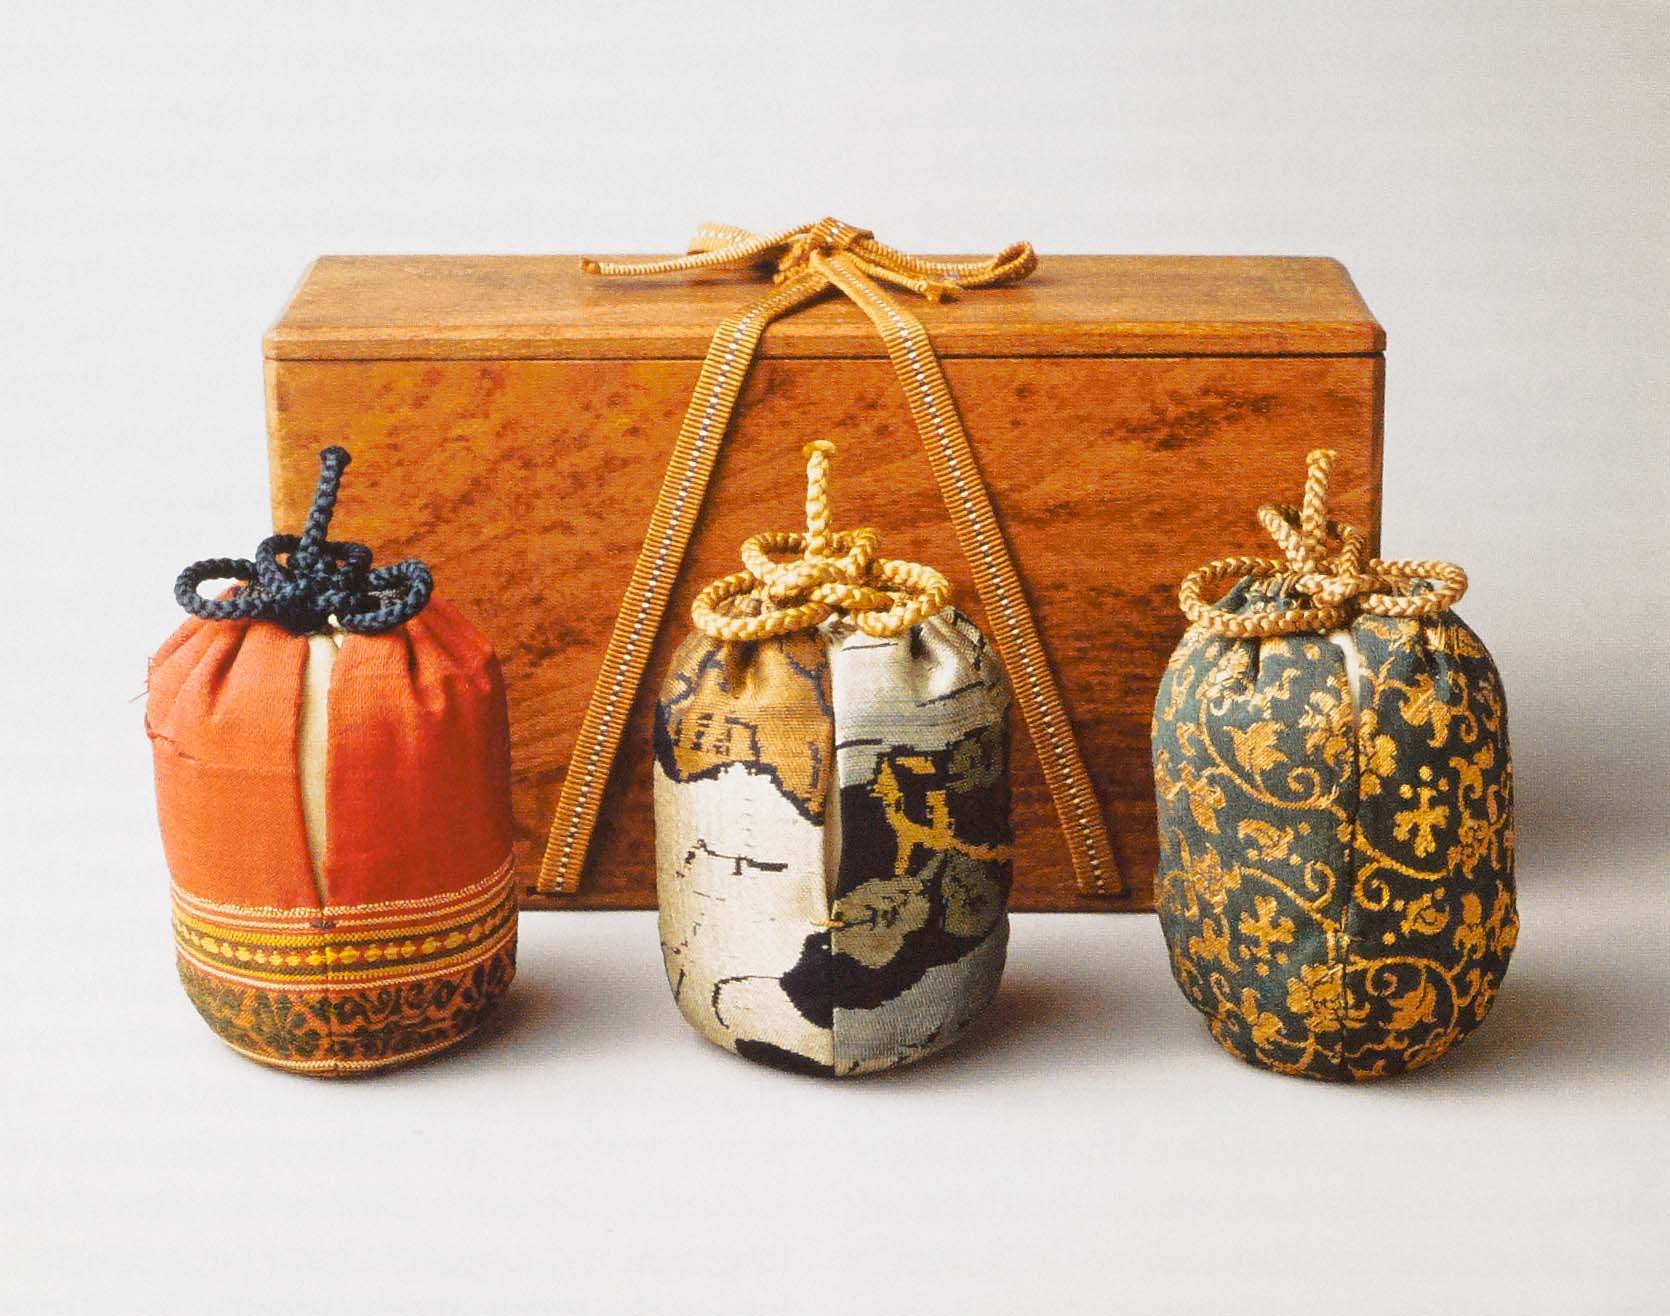 The three silk display bags with their box. Left: the informal bag of Satsuma Canton (Indian silk); center: the formal bag of Kiyomizu fragment (Chinese silk); right: the intermediate bag of gold brocade (Chinese silk).